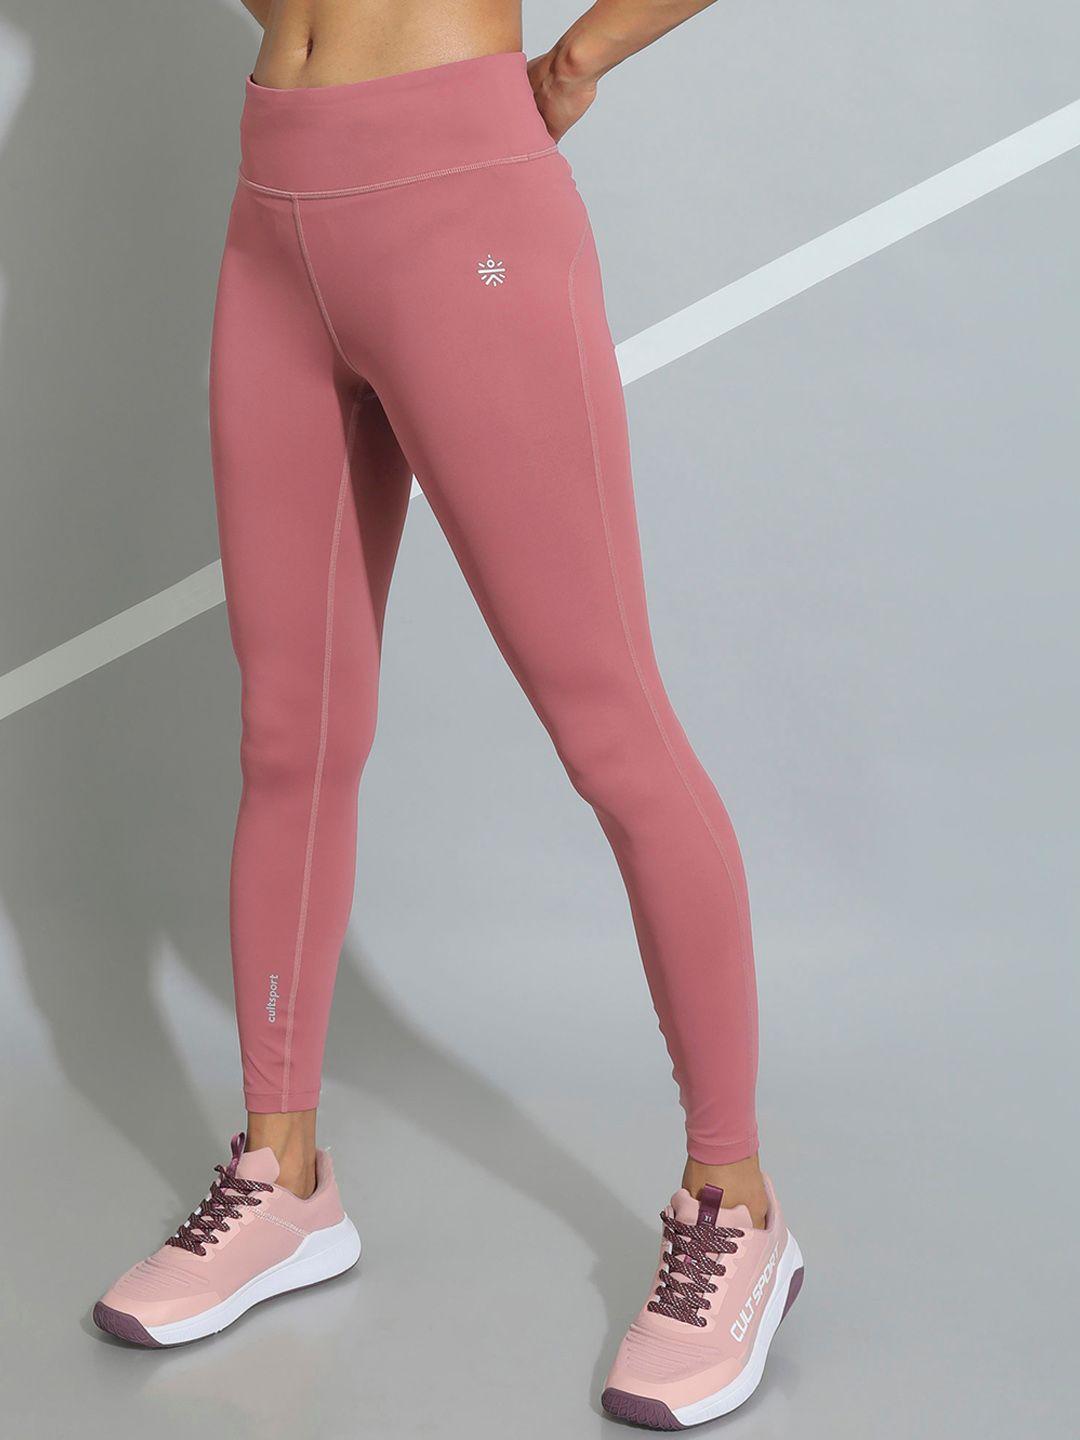 cultsport-women-dusty-pink-solid-rapid-dry-performance-tights